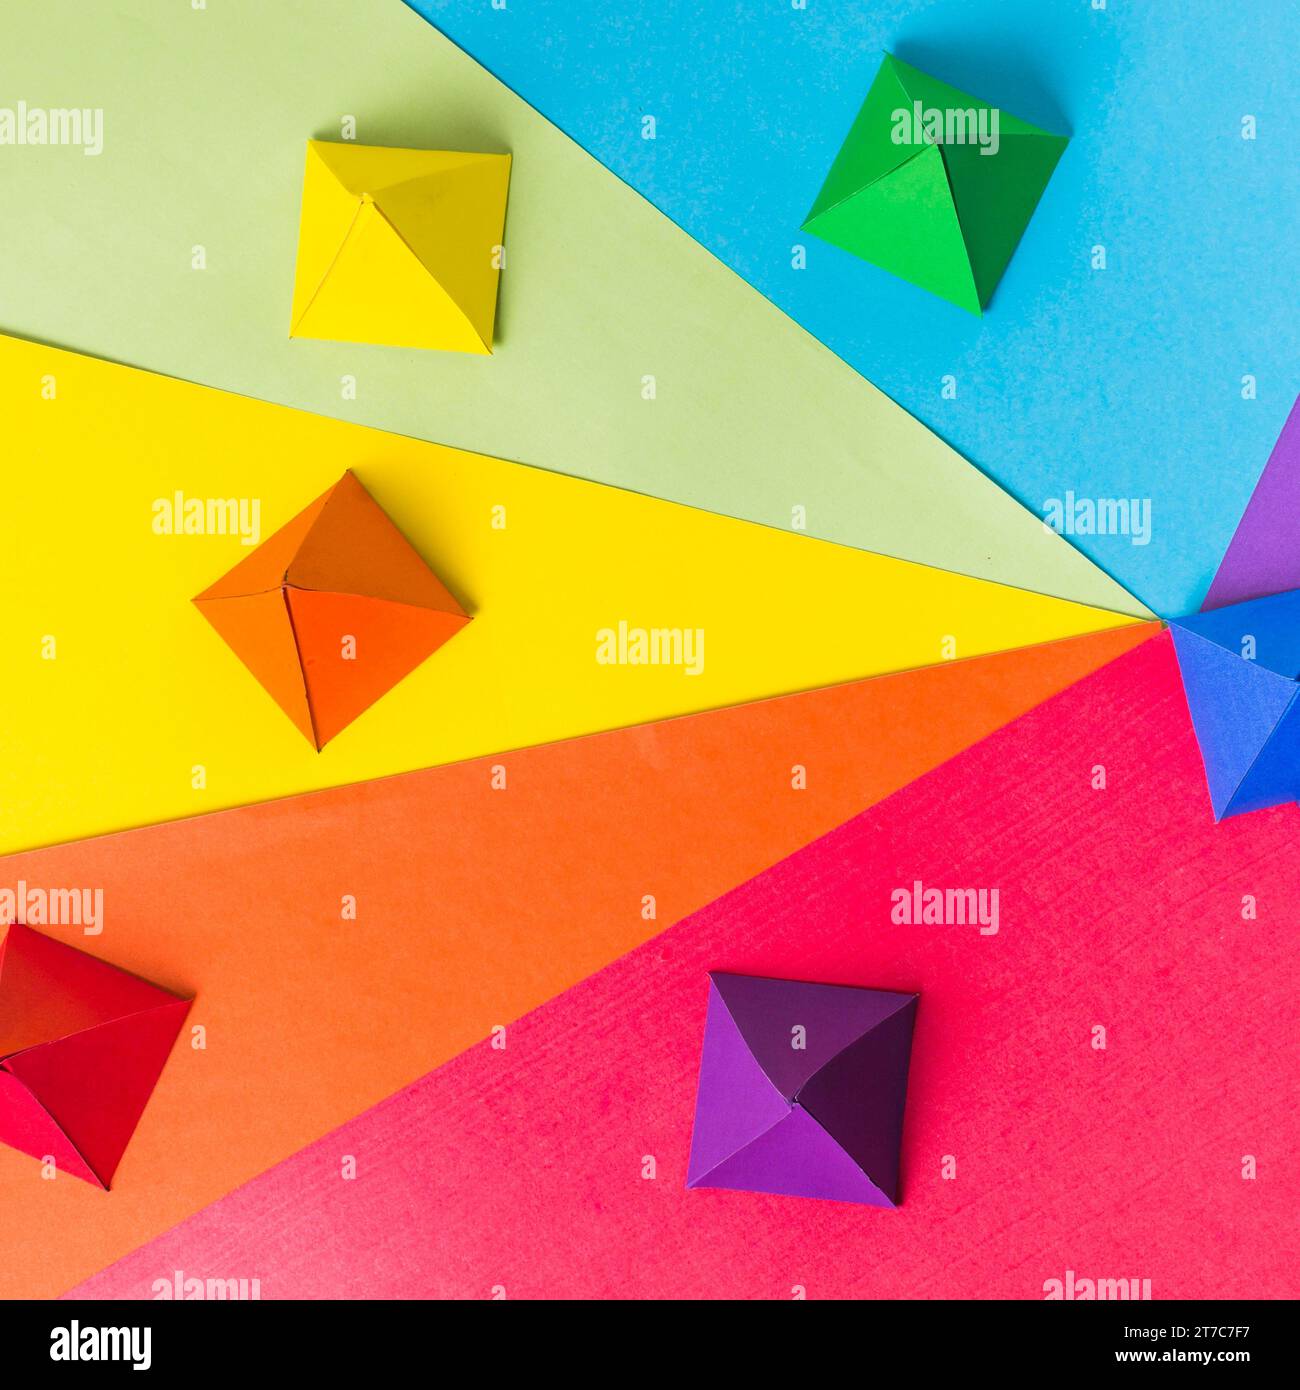 Paper origami bright lgbt colors Stock Photo